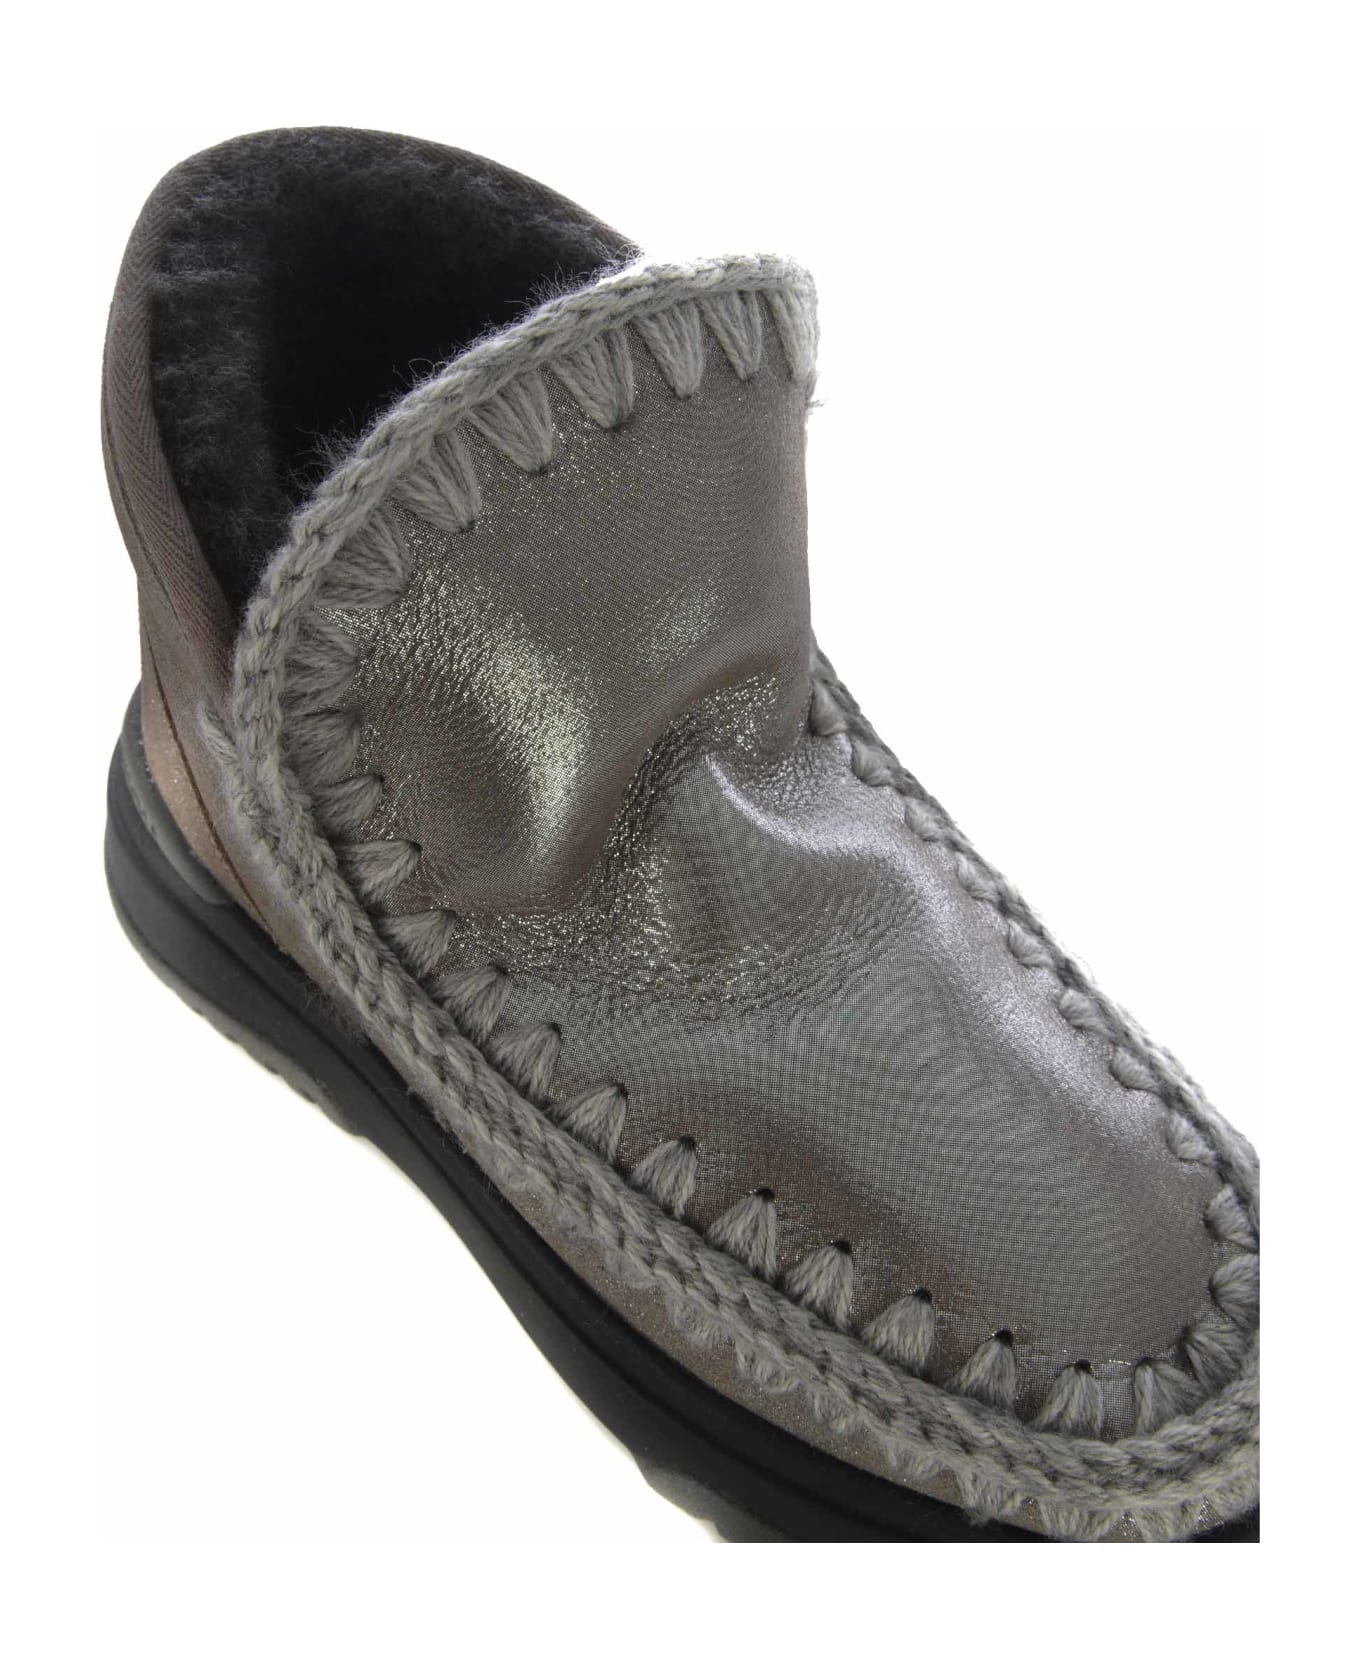 Mou Ankle Boots Mou "eskimo Jogger" Made Of Leather - Grigio argento ブーツ